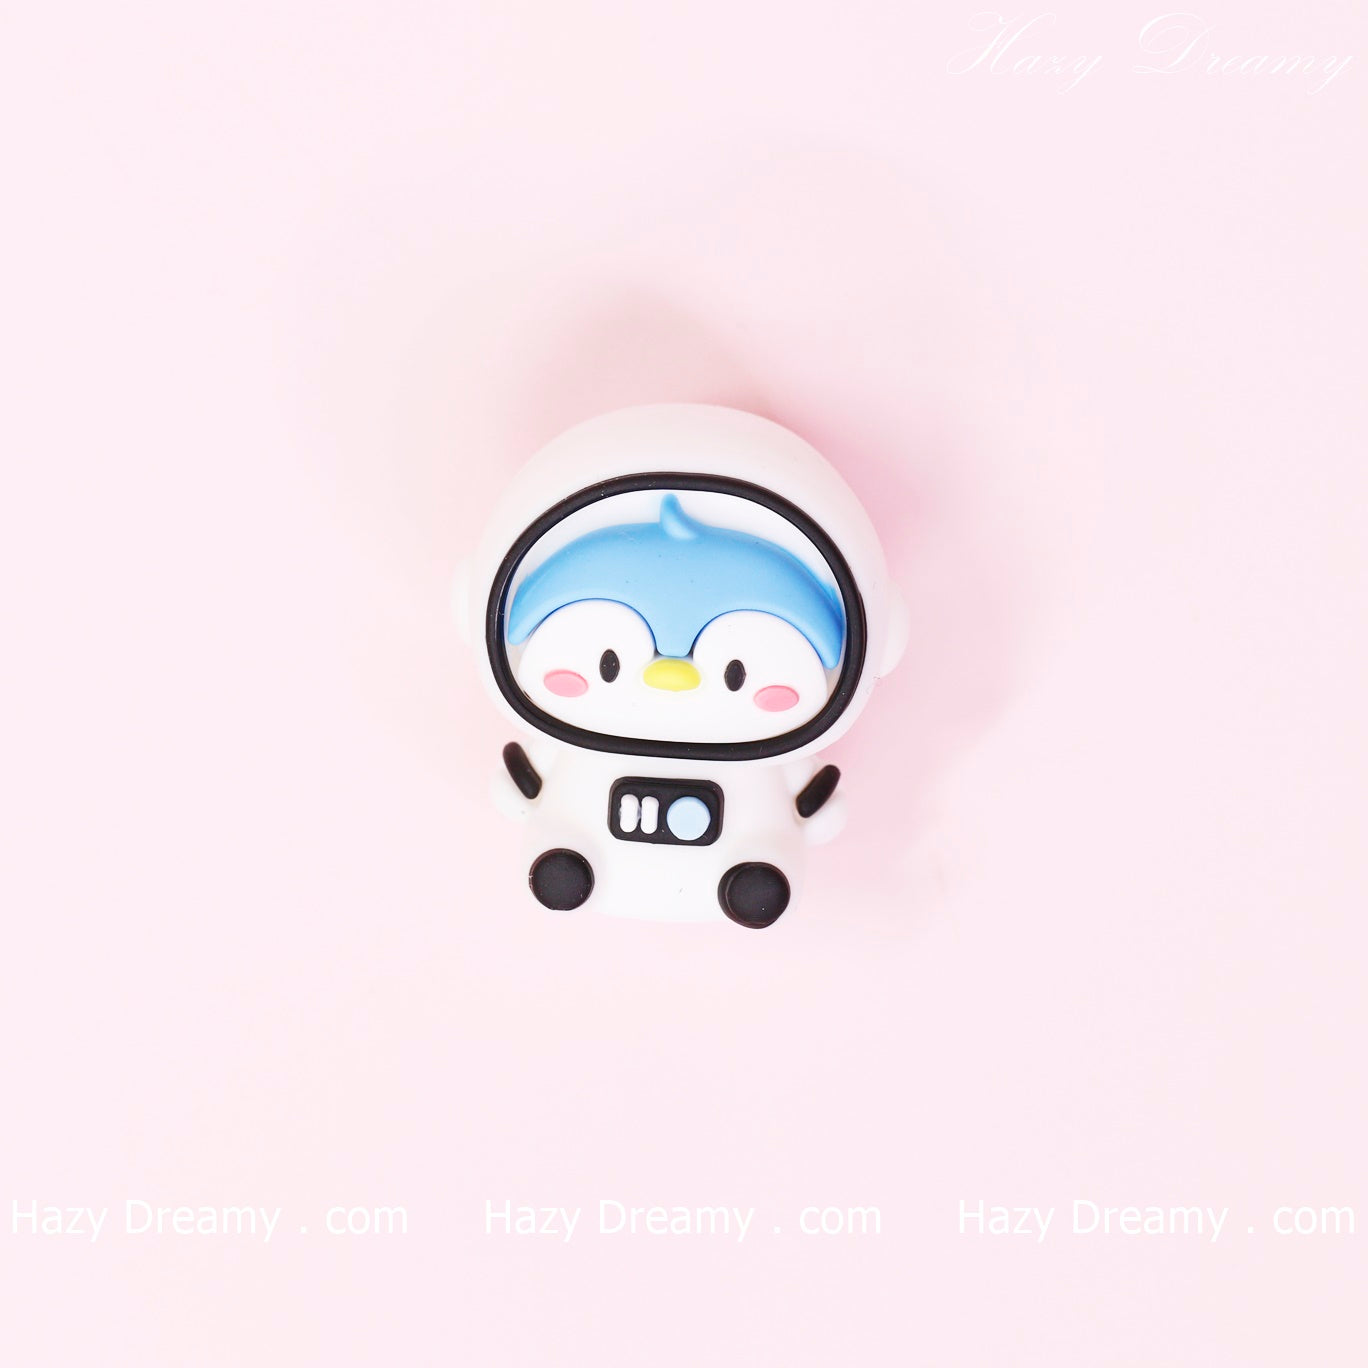 Cute Astronaut Penguin 3D Eraser - Perfect for Students and Stationery Lovers